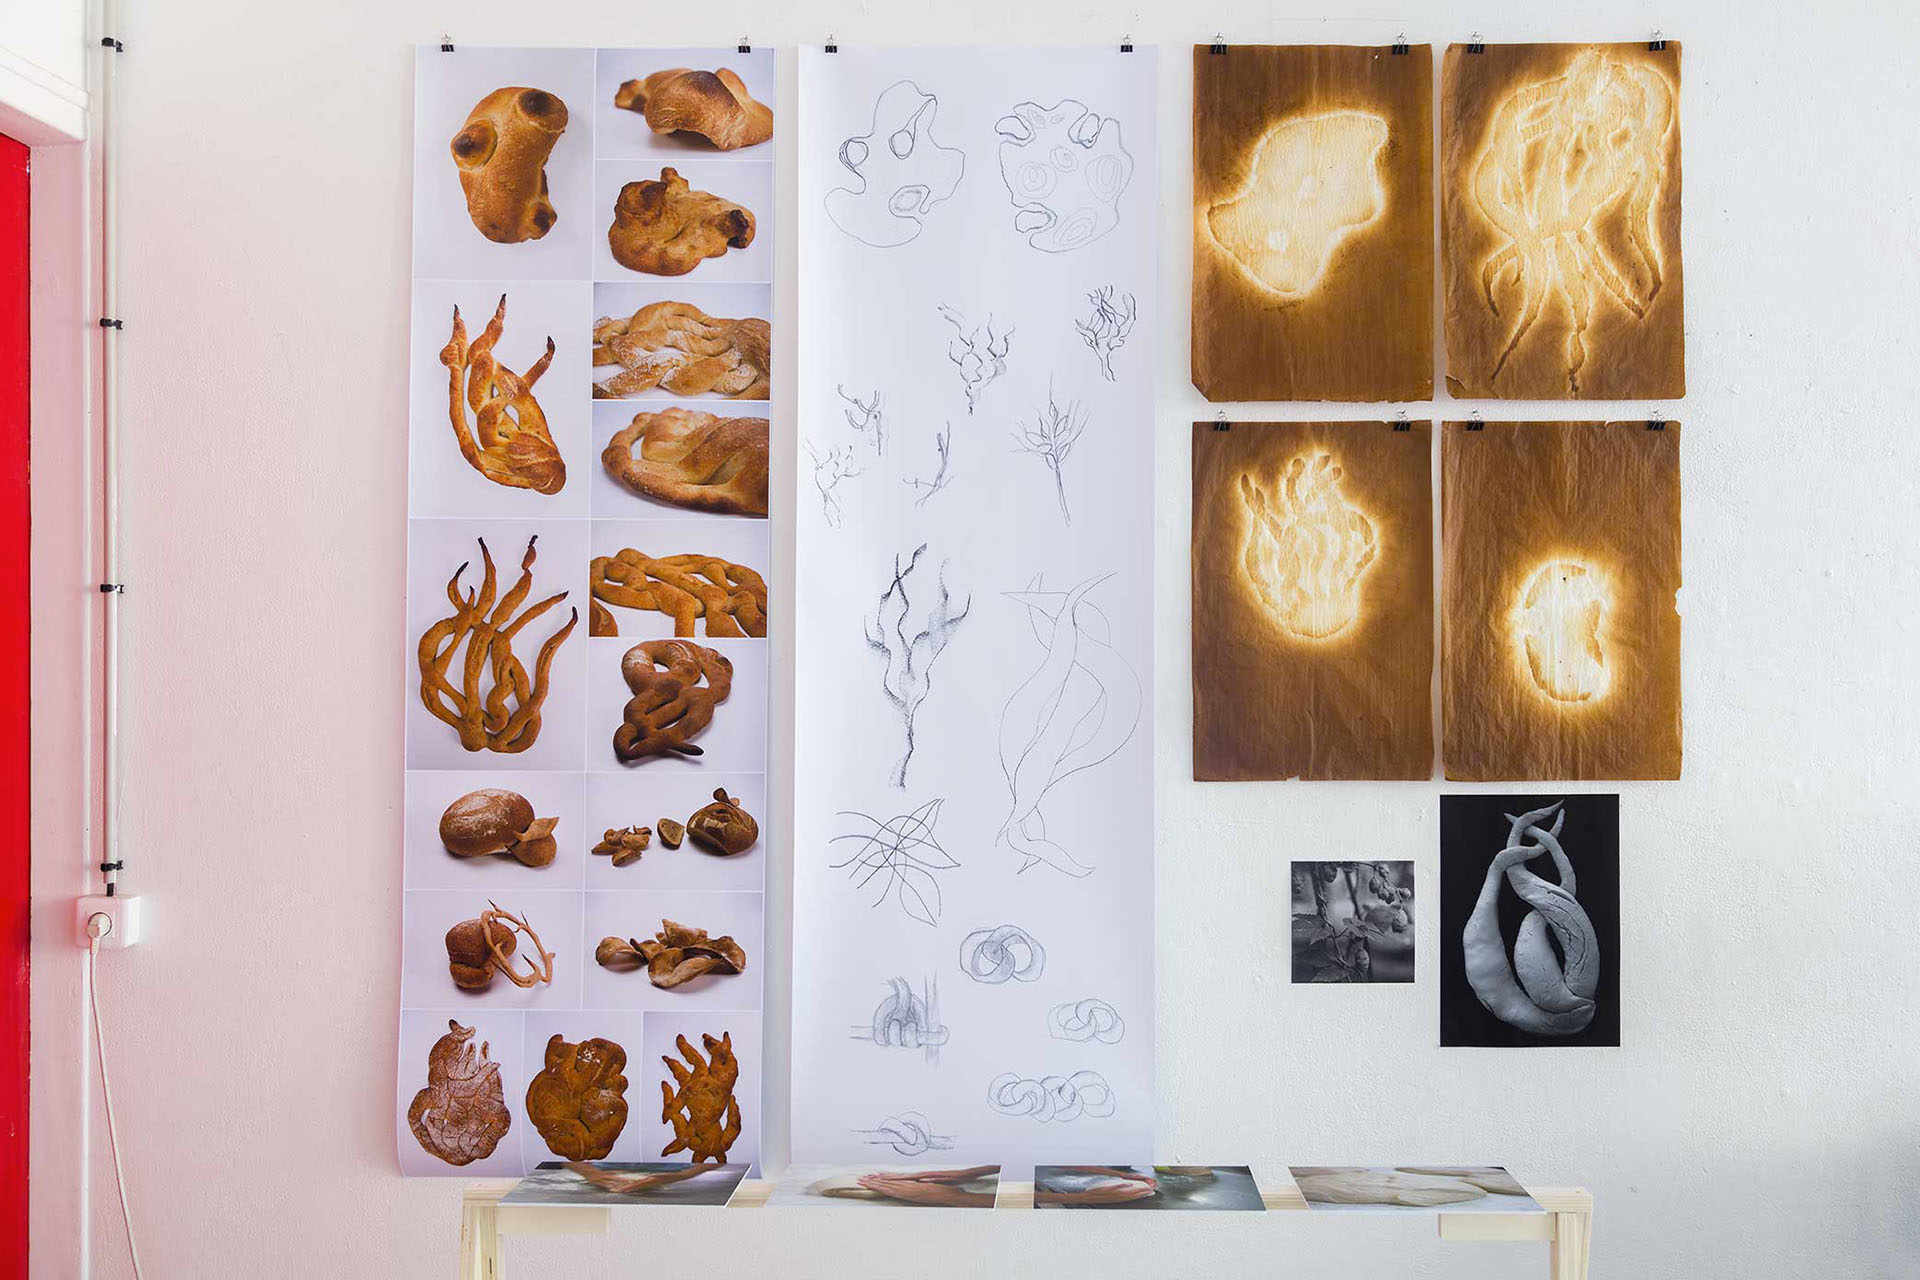 ecole_design_culinaire_master_food_bread_research